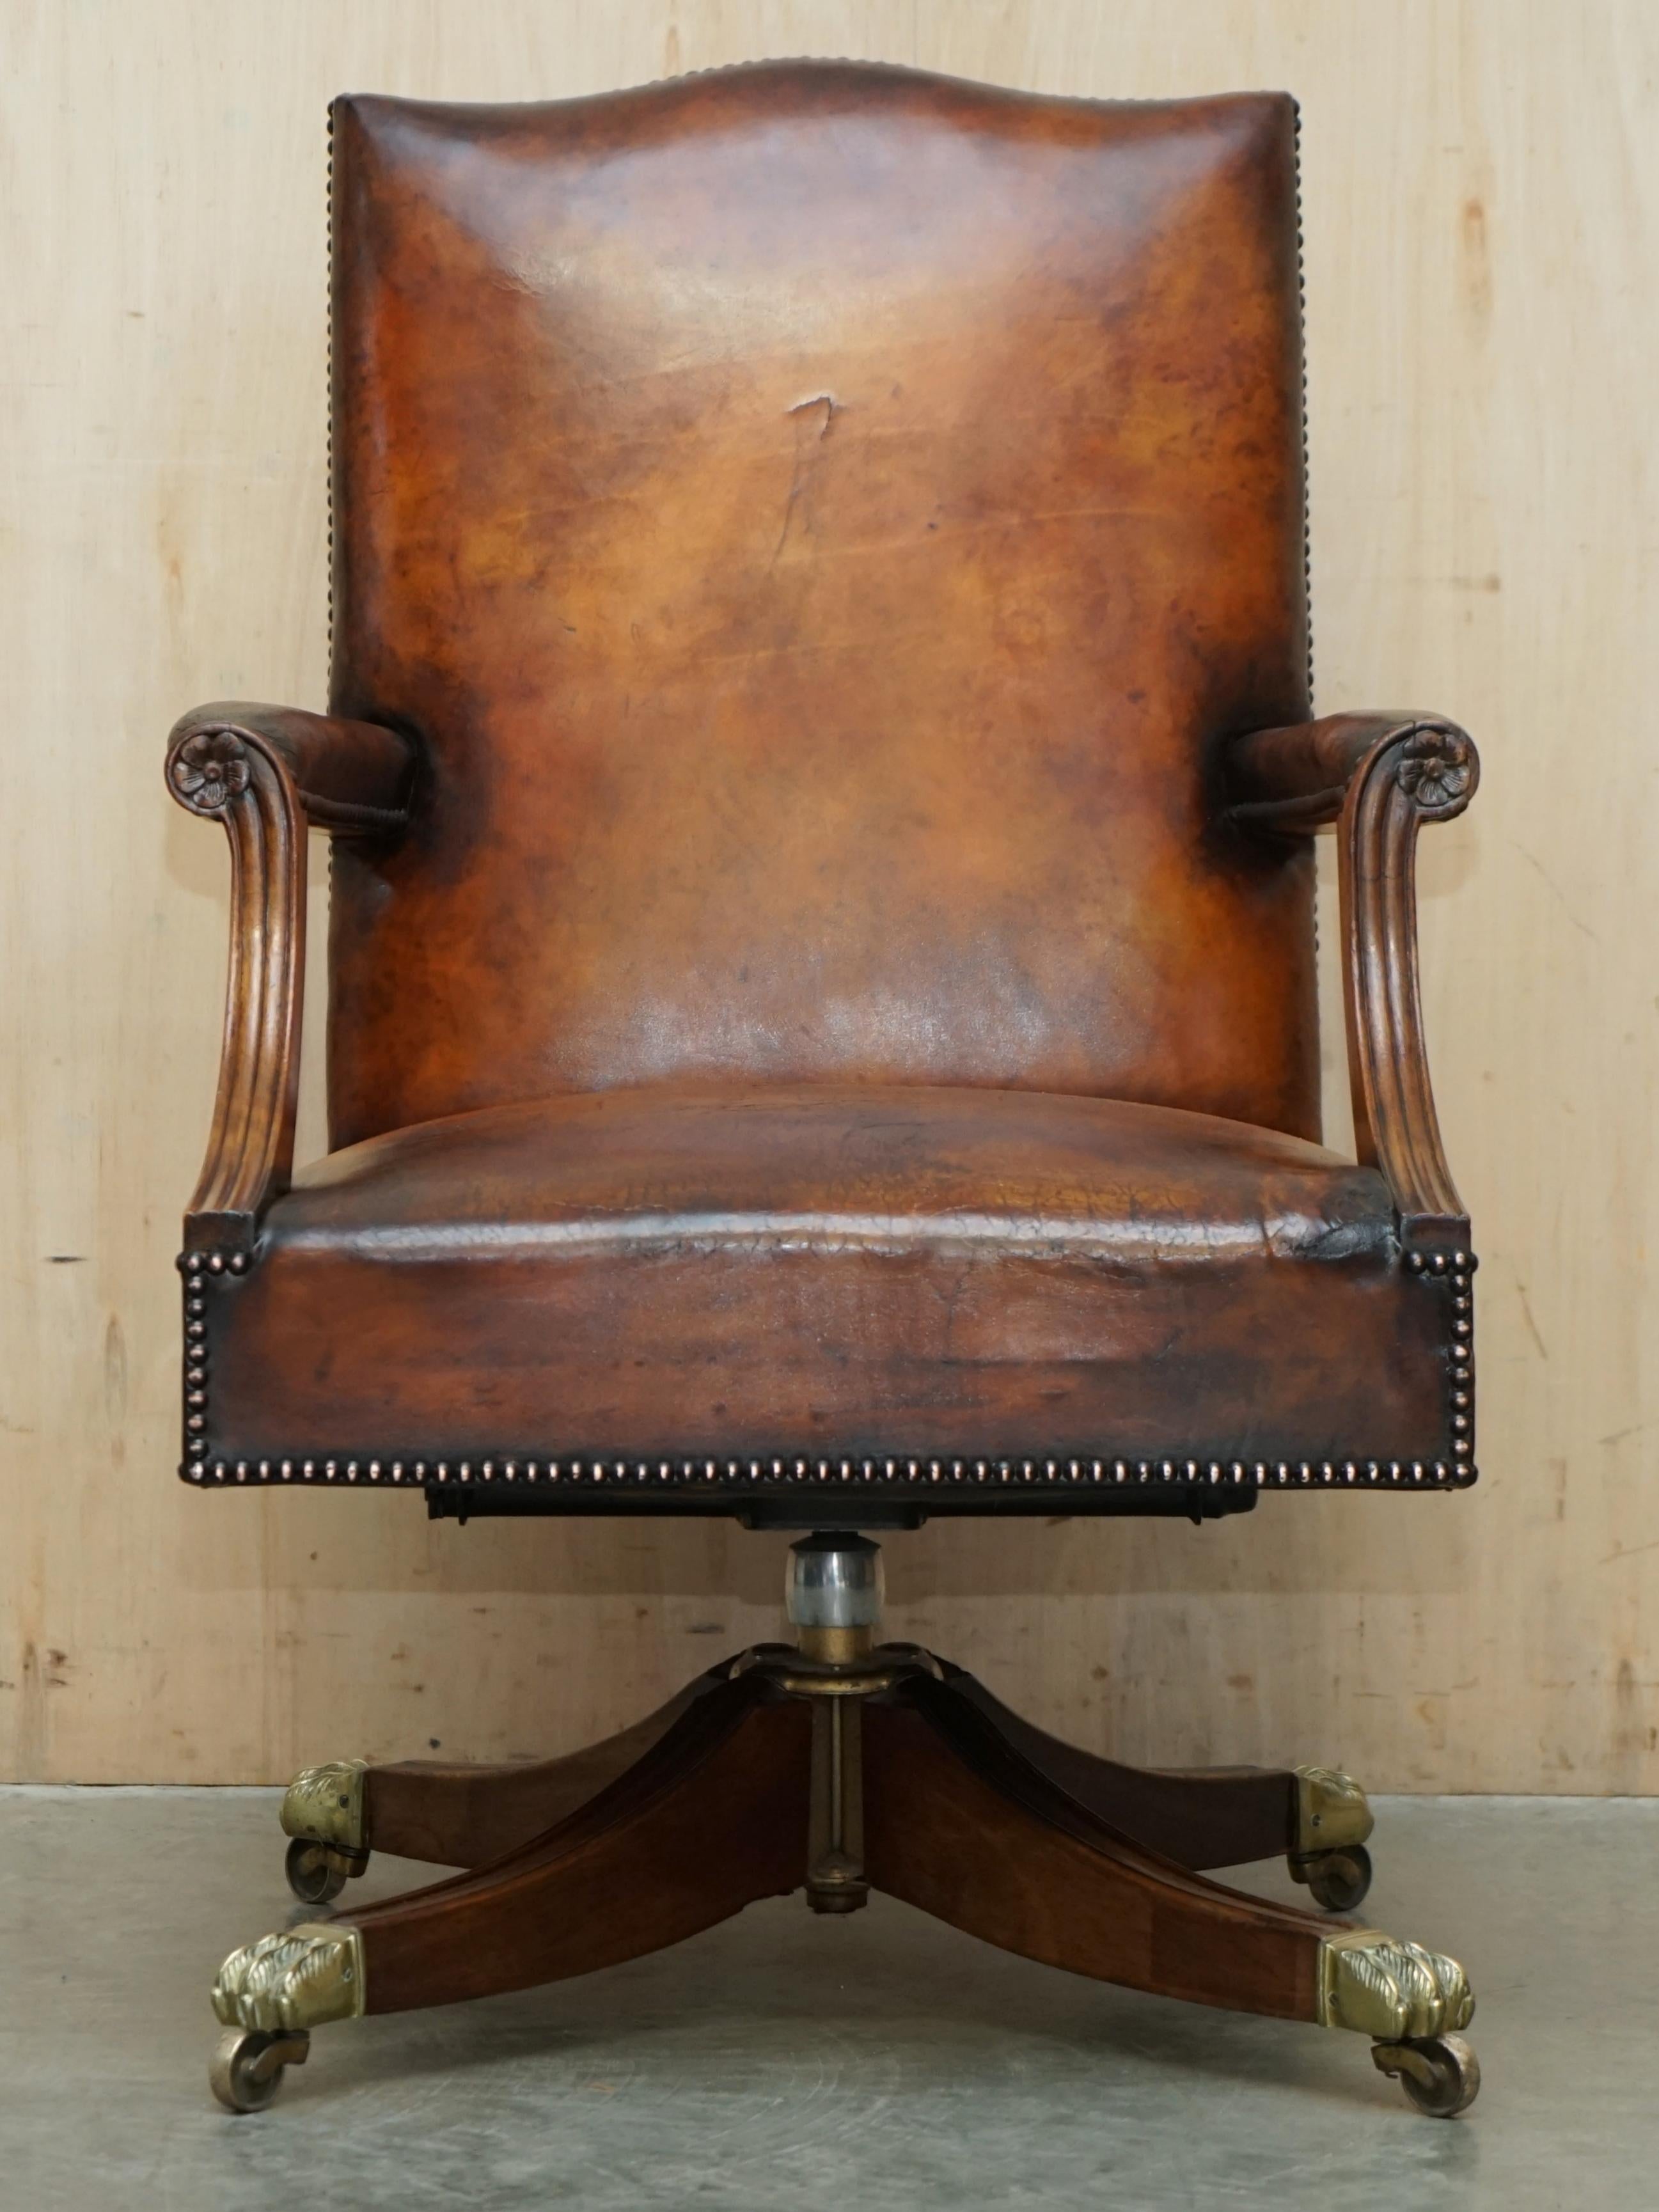 Royal House Antiques

Royal House Antiques is delighted to offer for sale this stunning original English circa 1940's full restored hand dyed brown leather captains office swivel armchair with solid brass, Lions Hairy Paw castors 

Please note the